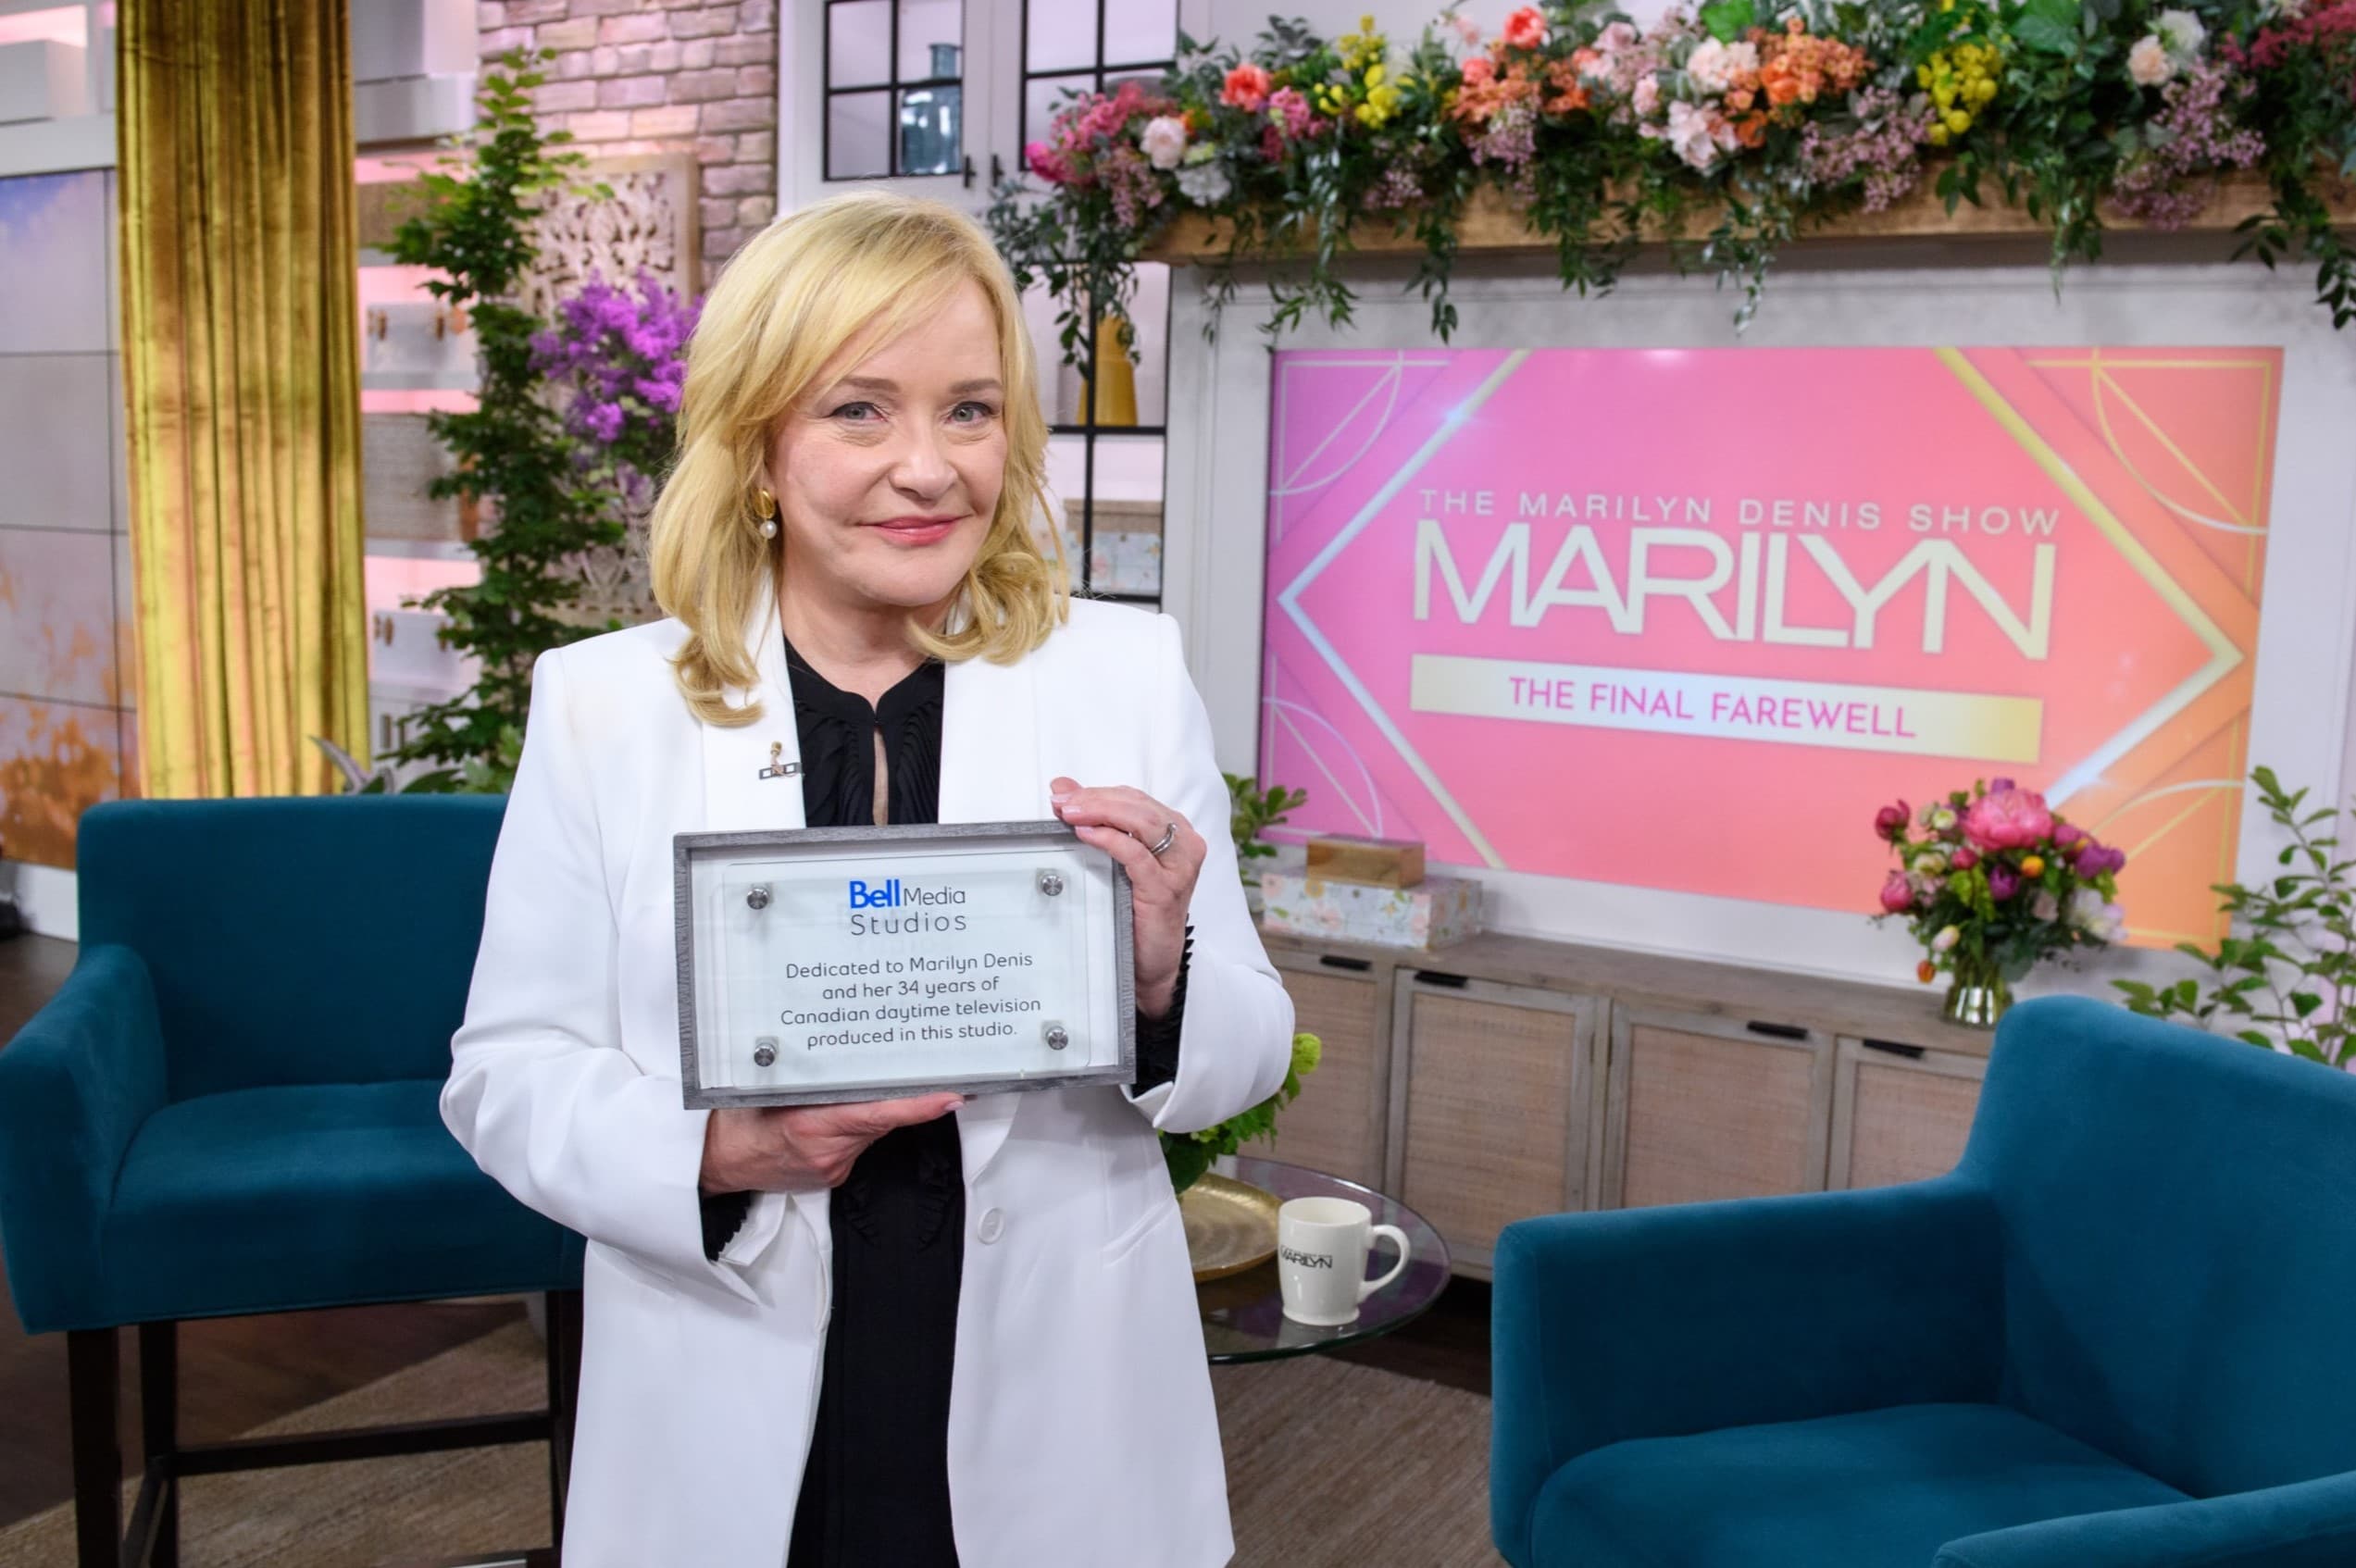 22-extraordinary-facts-about-marilyn-denis